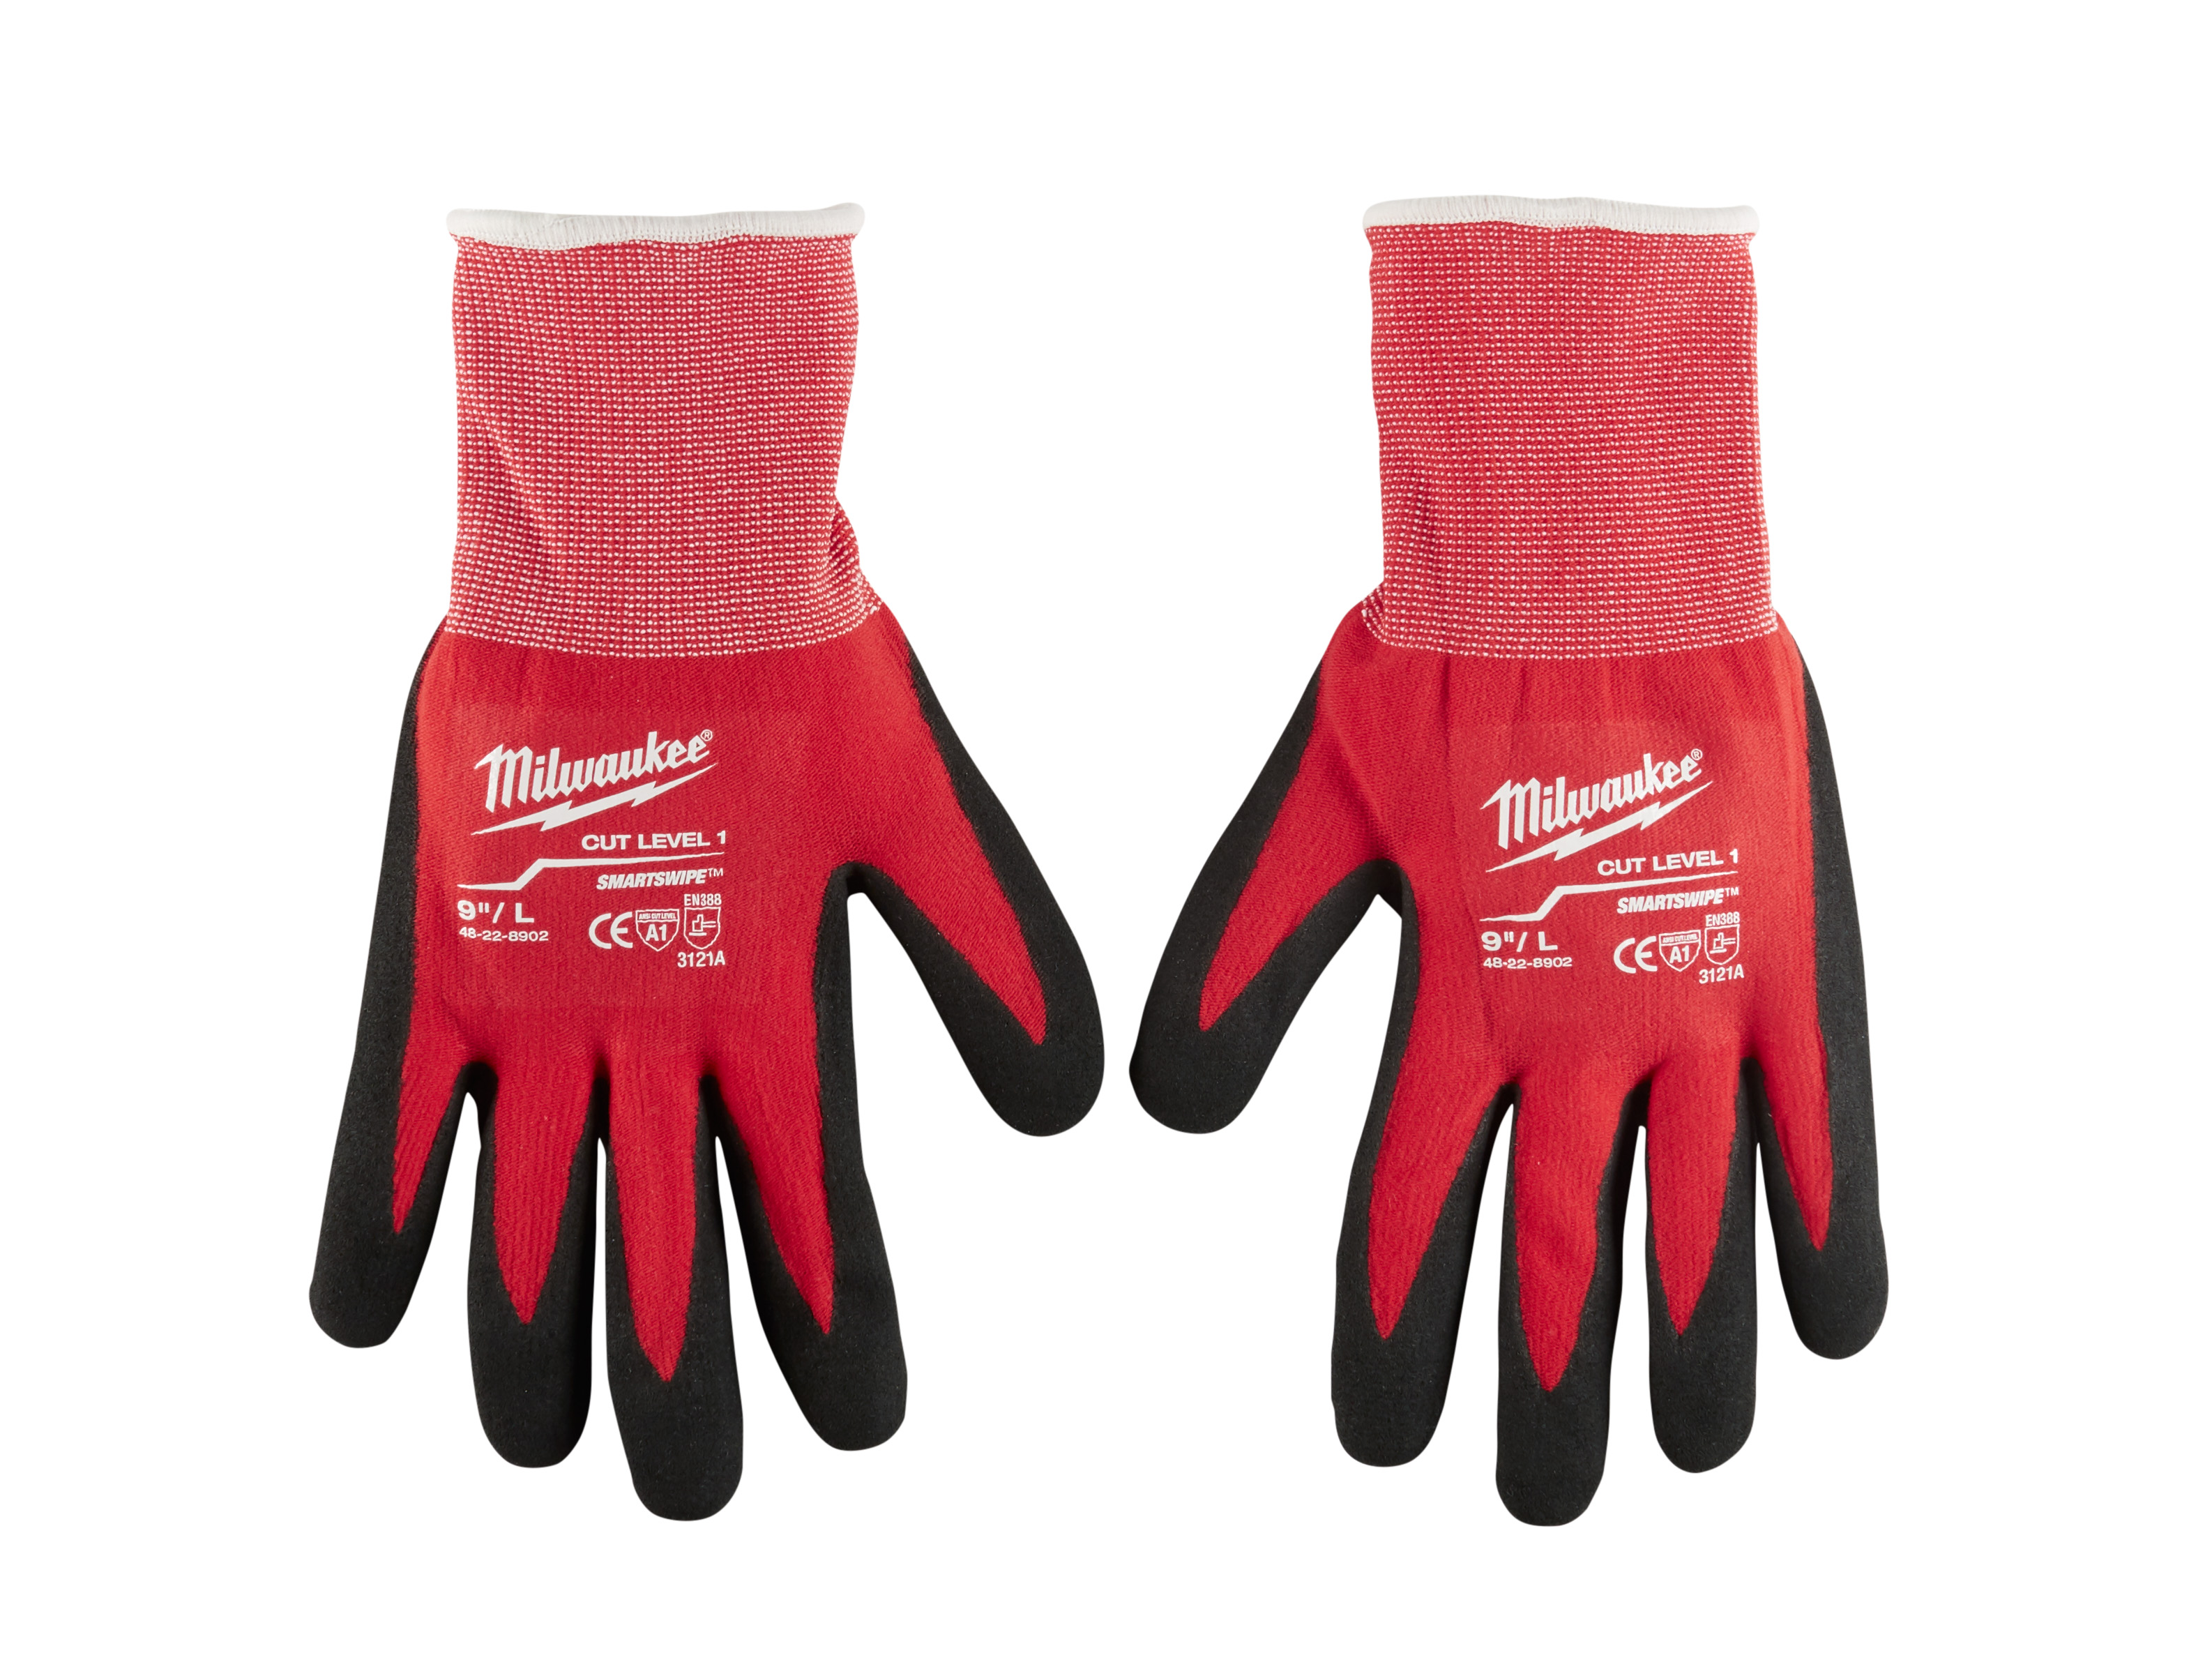 48228902 - Cut Level 1 Nitrile Dipped Gloves Large - Milwaukee®